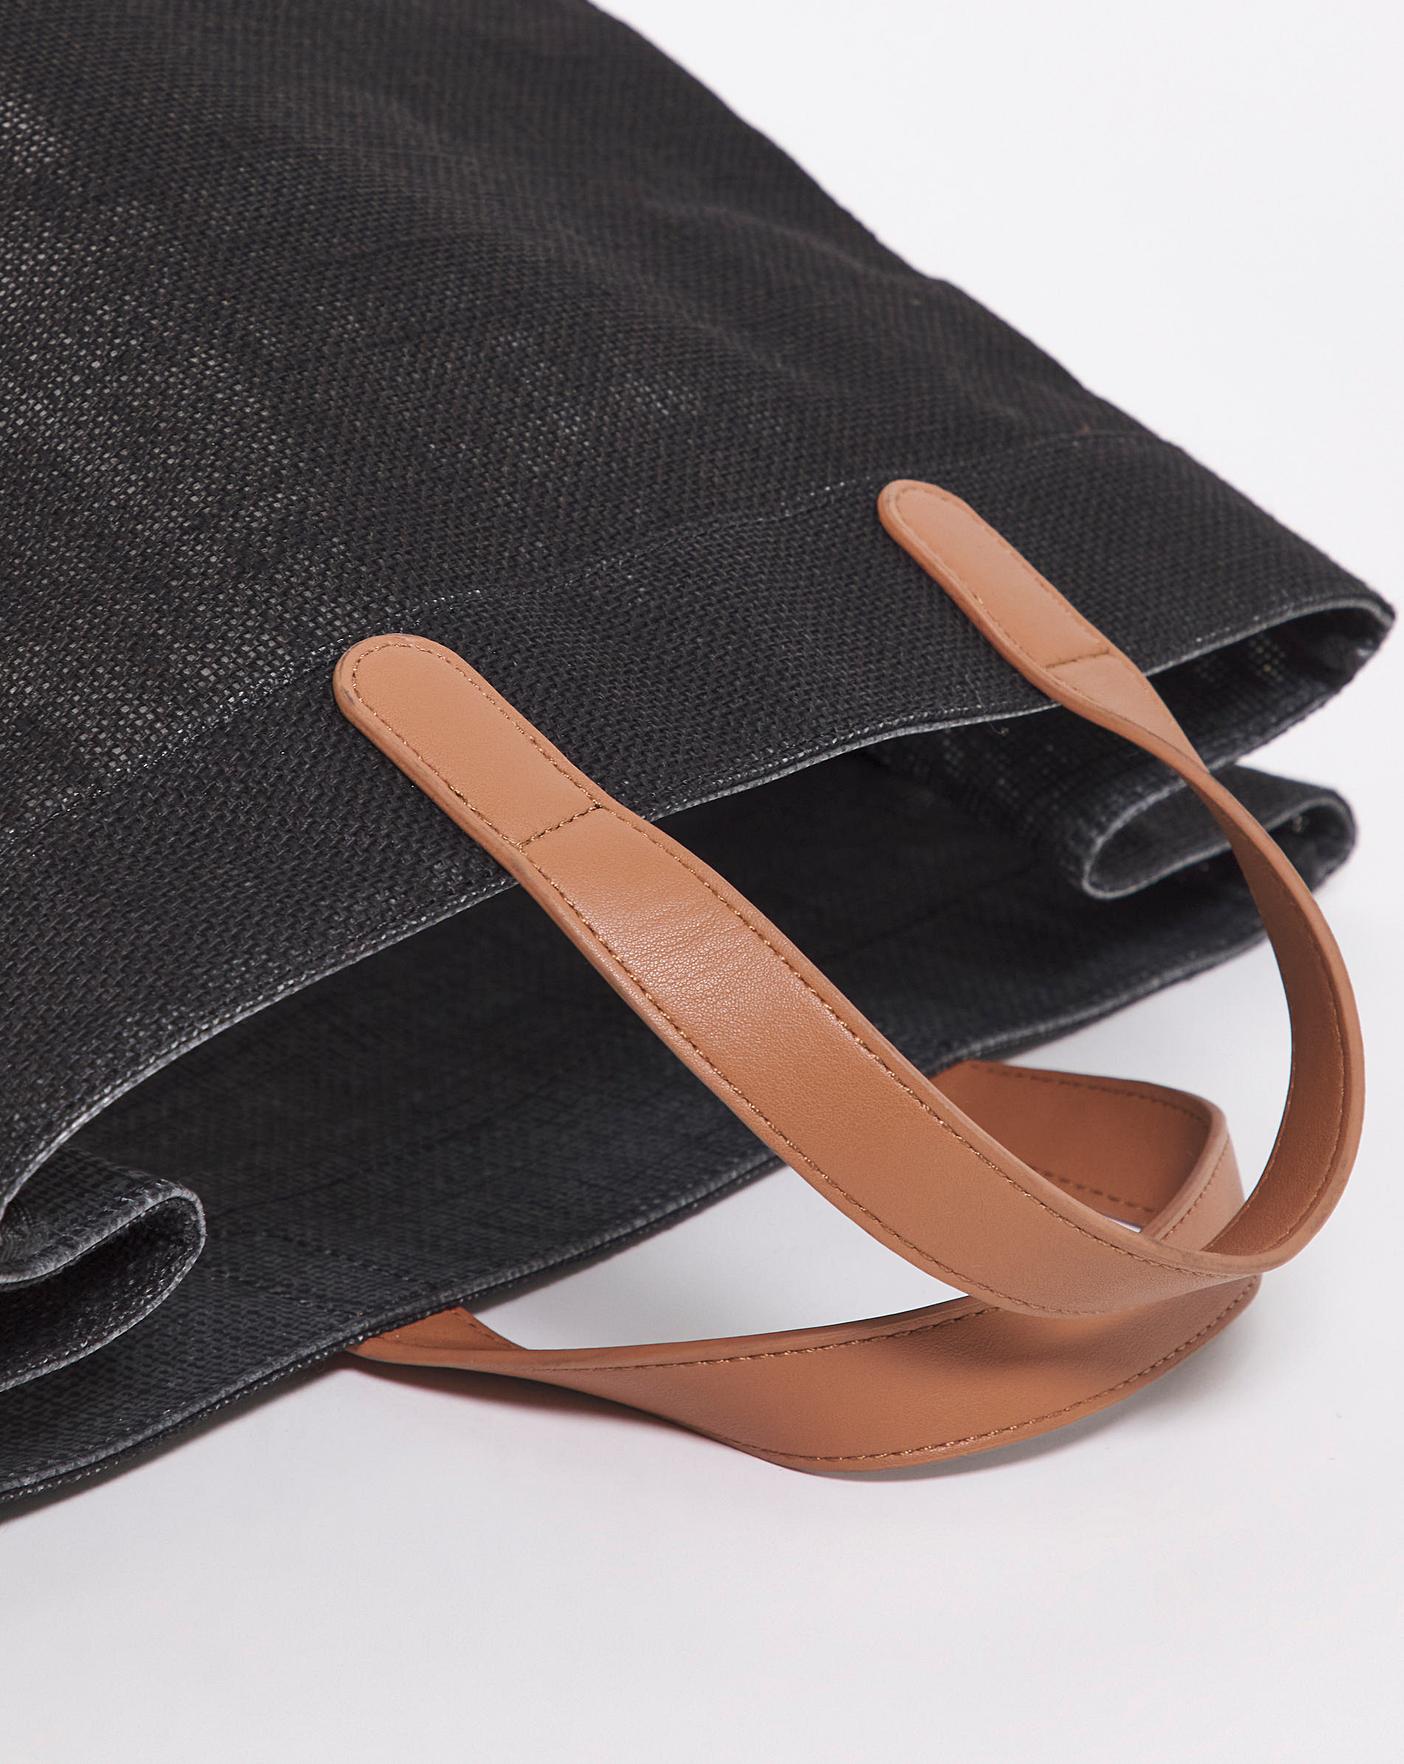 Black Canvas Structured Tote Bag